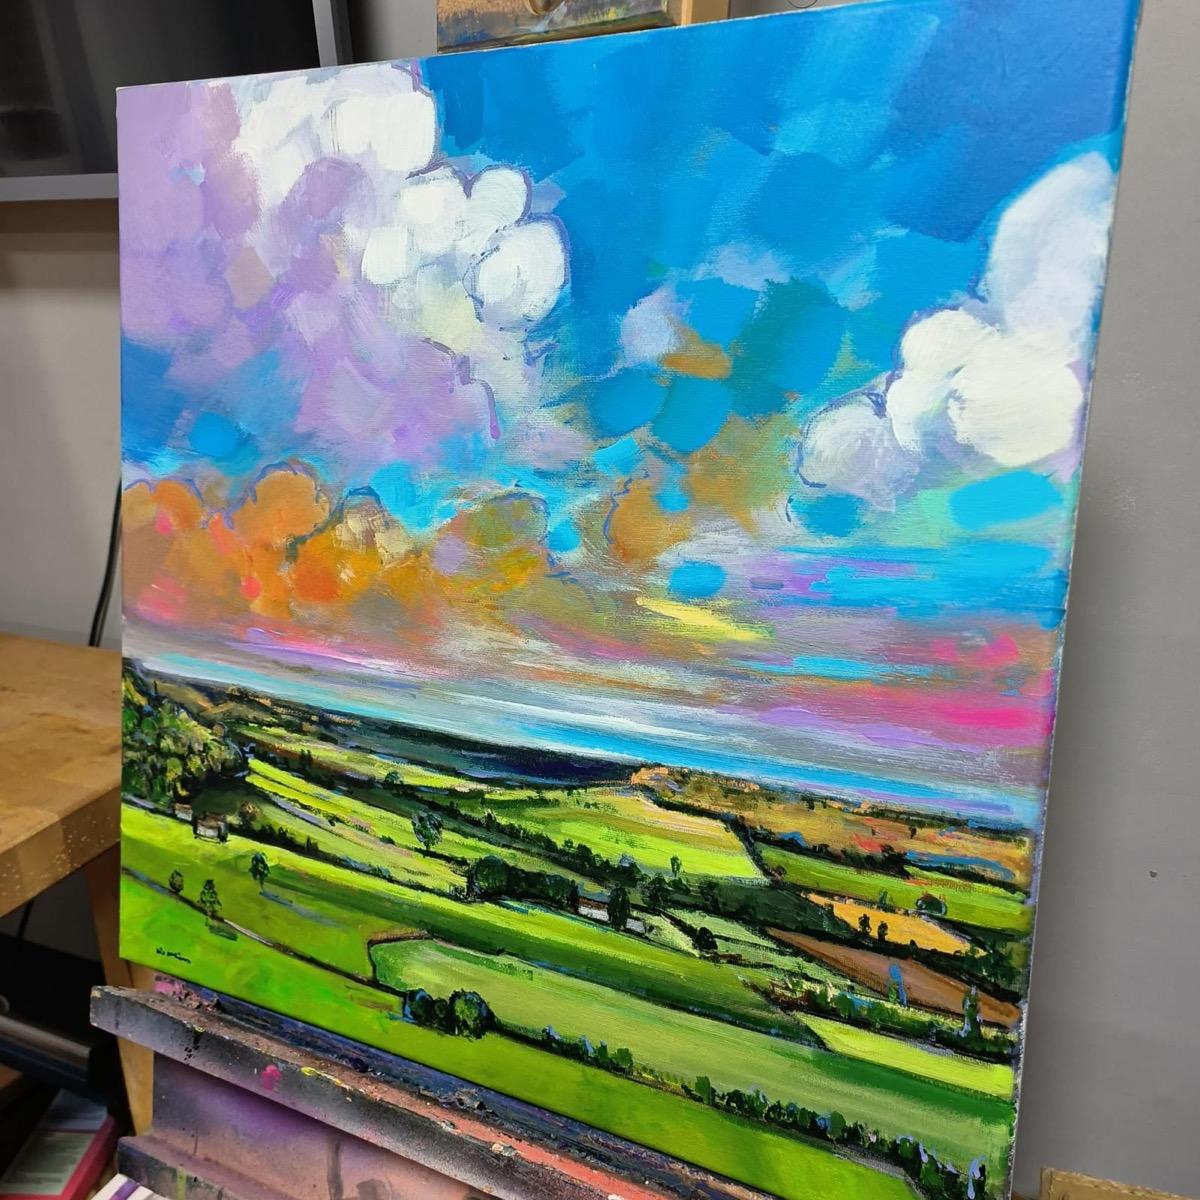 Original painting by Kris McKinnon. Landscapes in the cotswolds showing a varied range of pastel tones.

ADDITIONAL INFORMATION:
Straw on the Wild Landscape by Kris McKinnon
Original painting
Acrylic on canvas
Sold unframed
Complete size of unframed